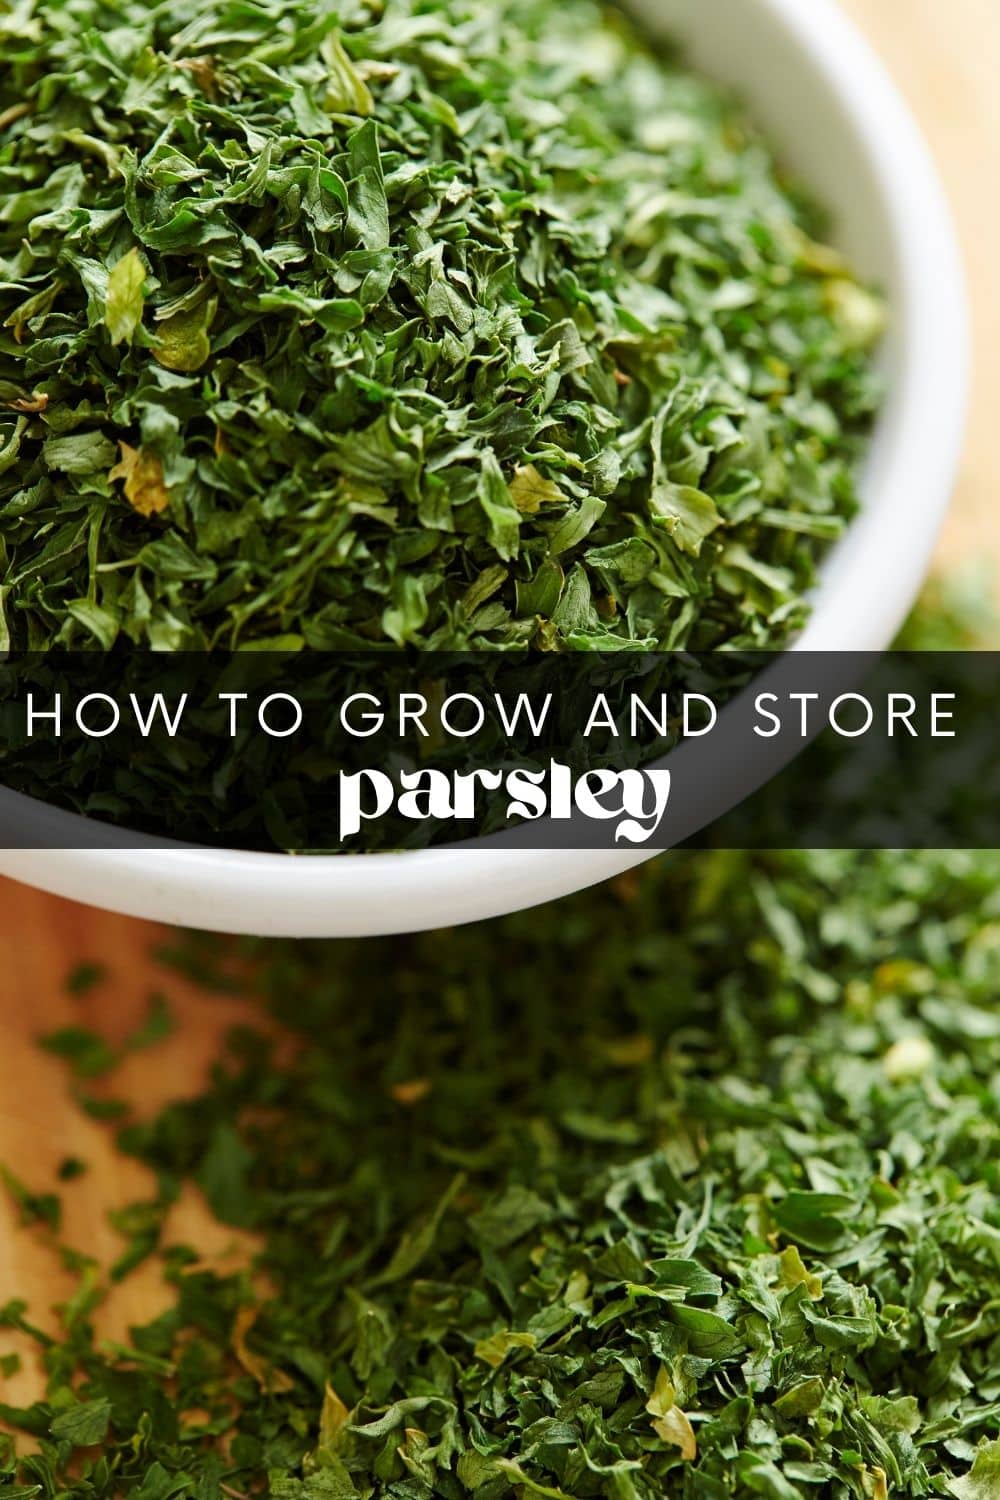 With a compact growth habit and delicate leaves, parsley is the perfect addition to your herb garden. It’s easily grown in small spaces, pots, or even on windowsills! Learn how to grow parsley, and then use it to garnish your meals or add flavor to soups and stews.